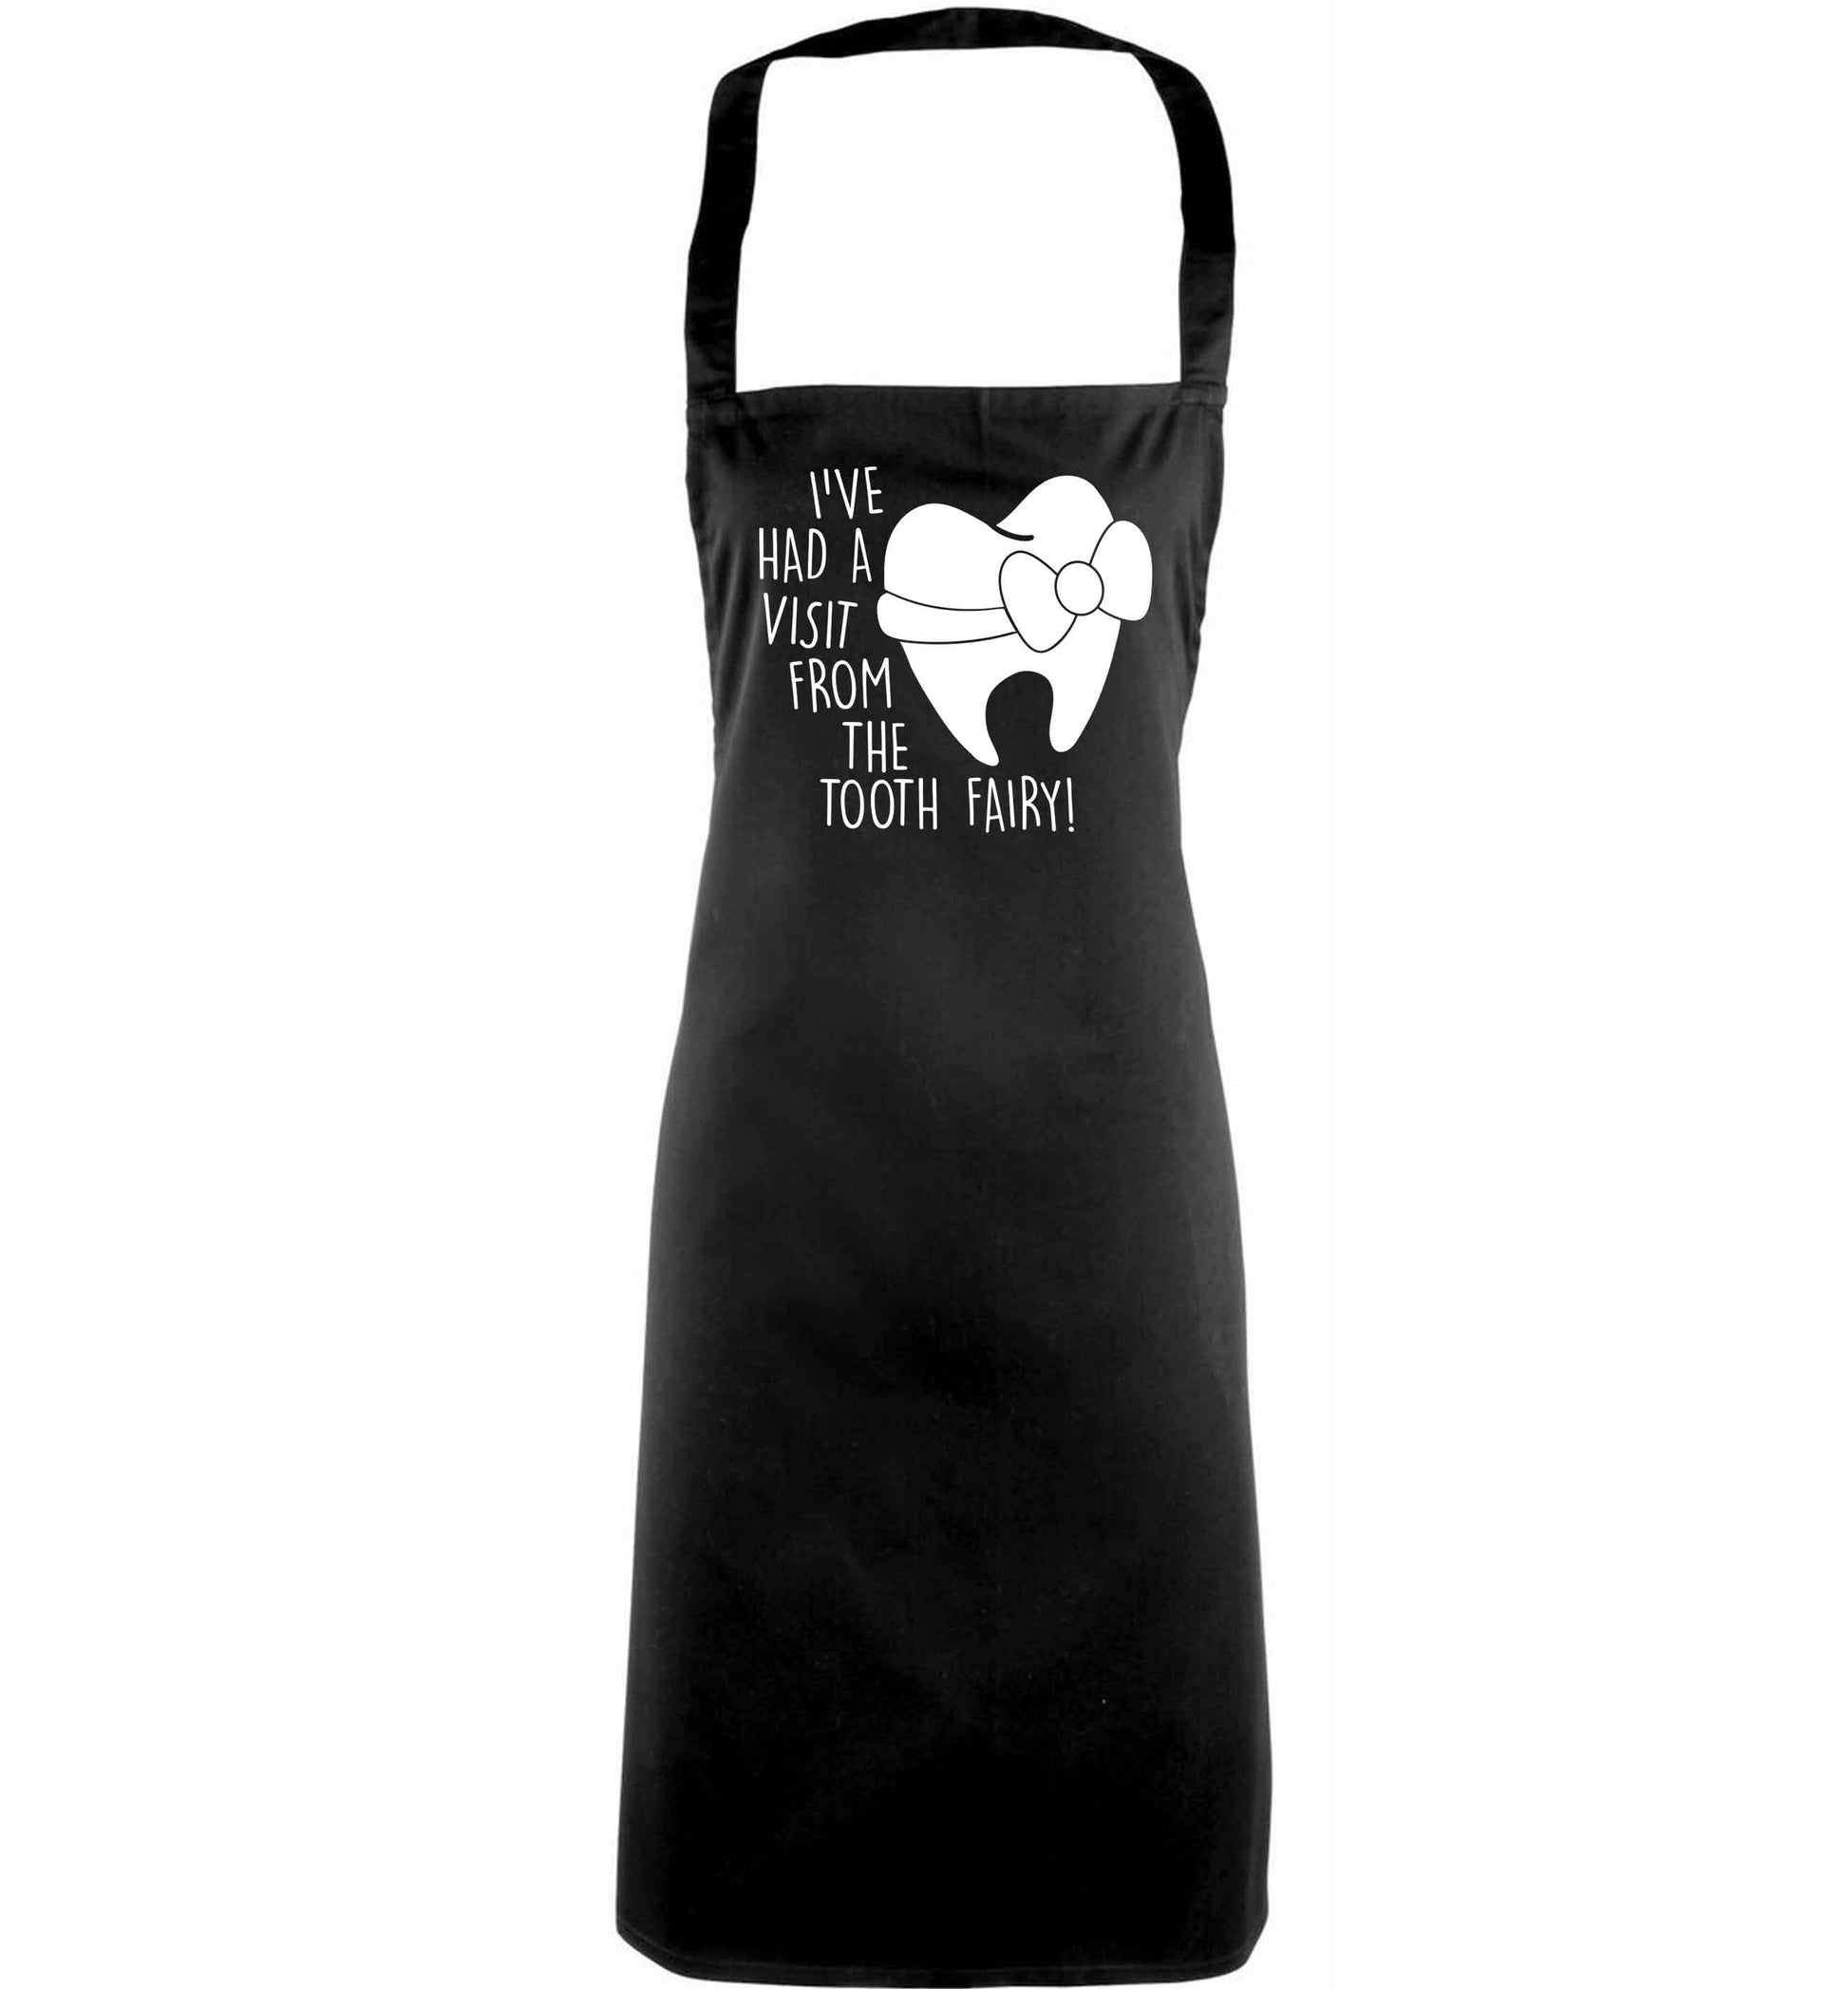 Visit From Tooth Fairy adults black apron